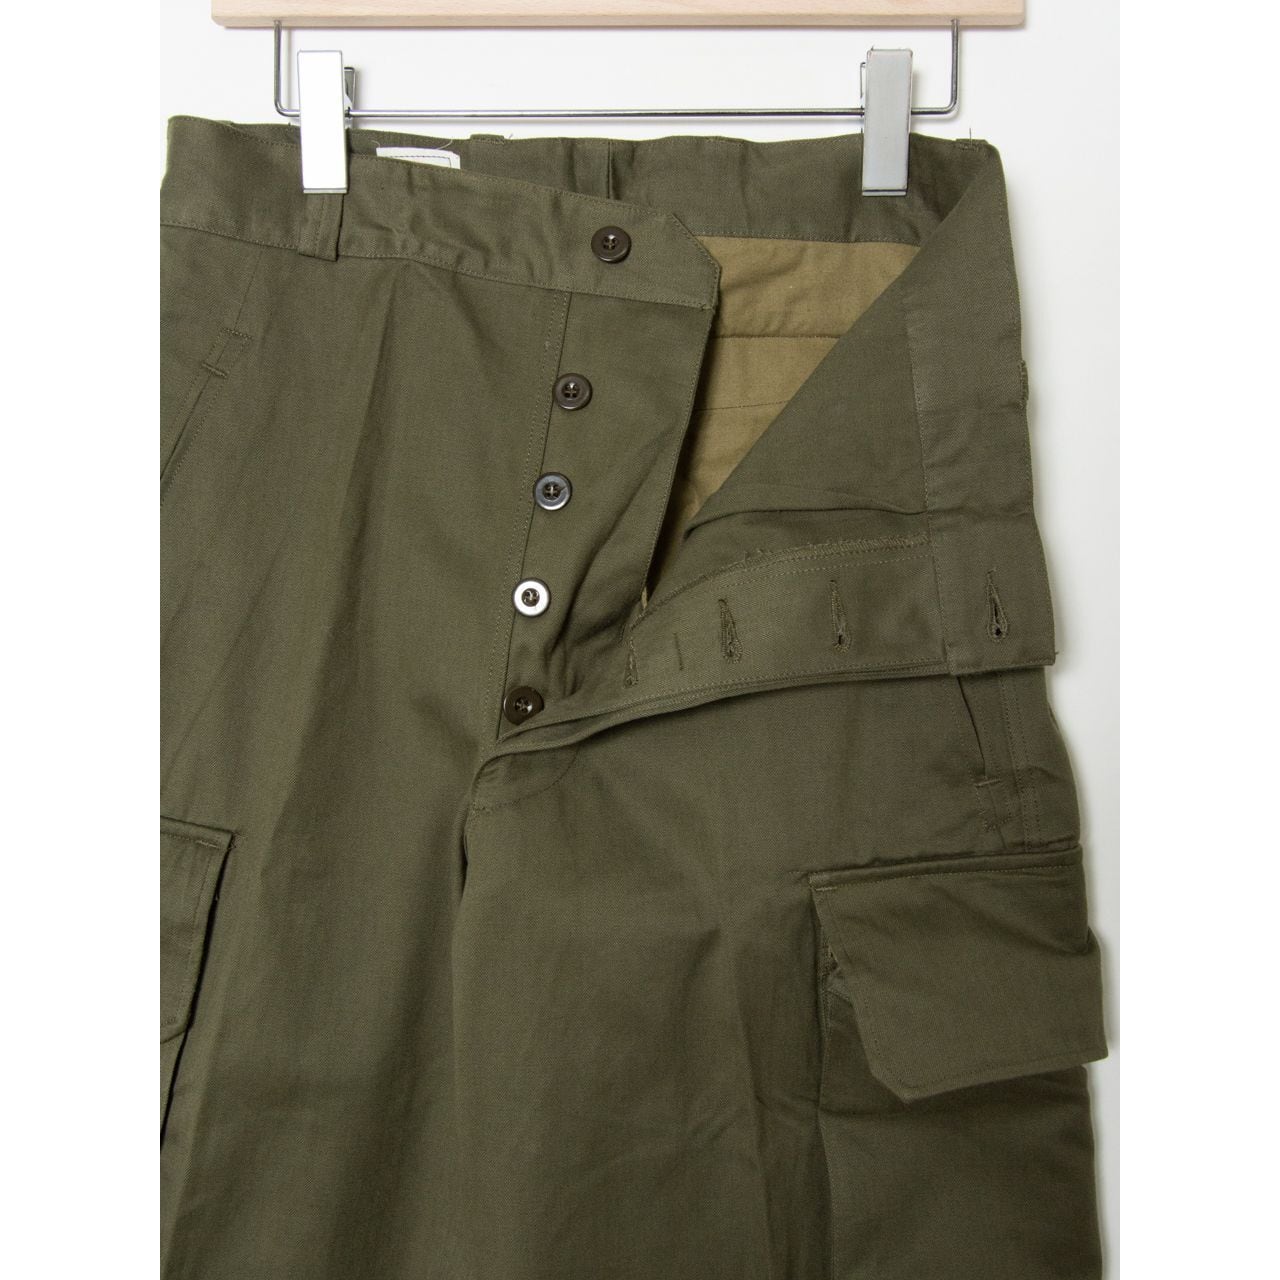 Dead stock】French army M-47 HBT cargo pants（デッドストック